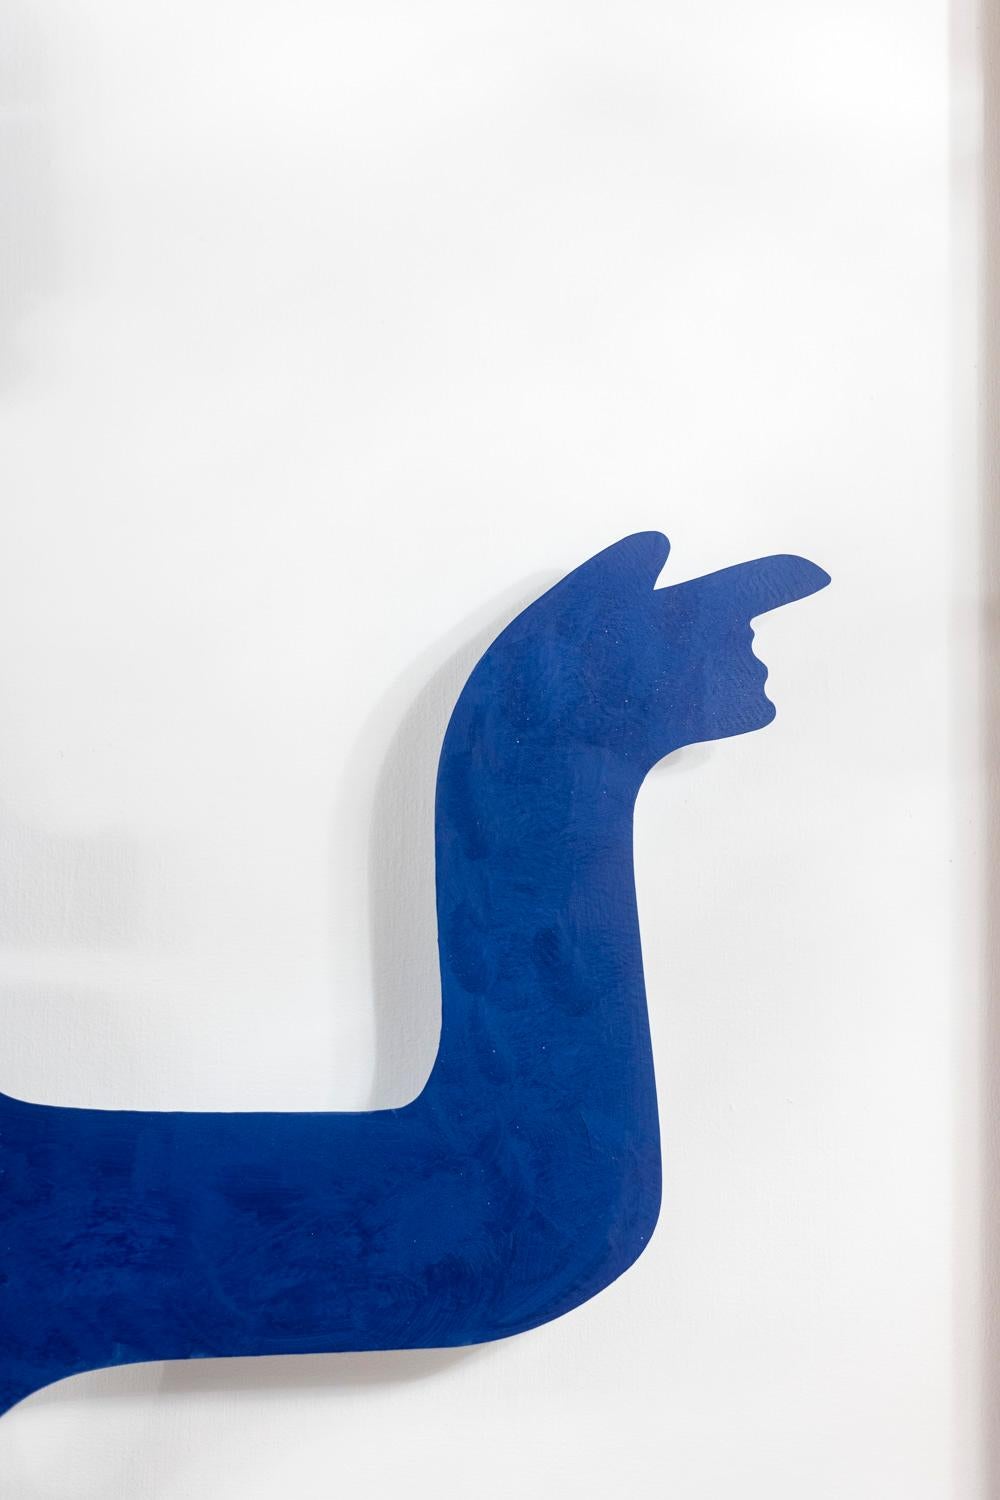 Decorative panel, or relief sculpture, entitled “Eva”, composed of an abstract character in blue lacquered metal, in its solid blond oak frame and with its cream lacquered slate background.

Contemporary artist’s work signed and